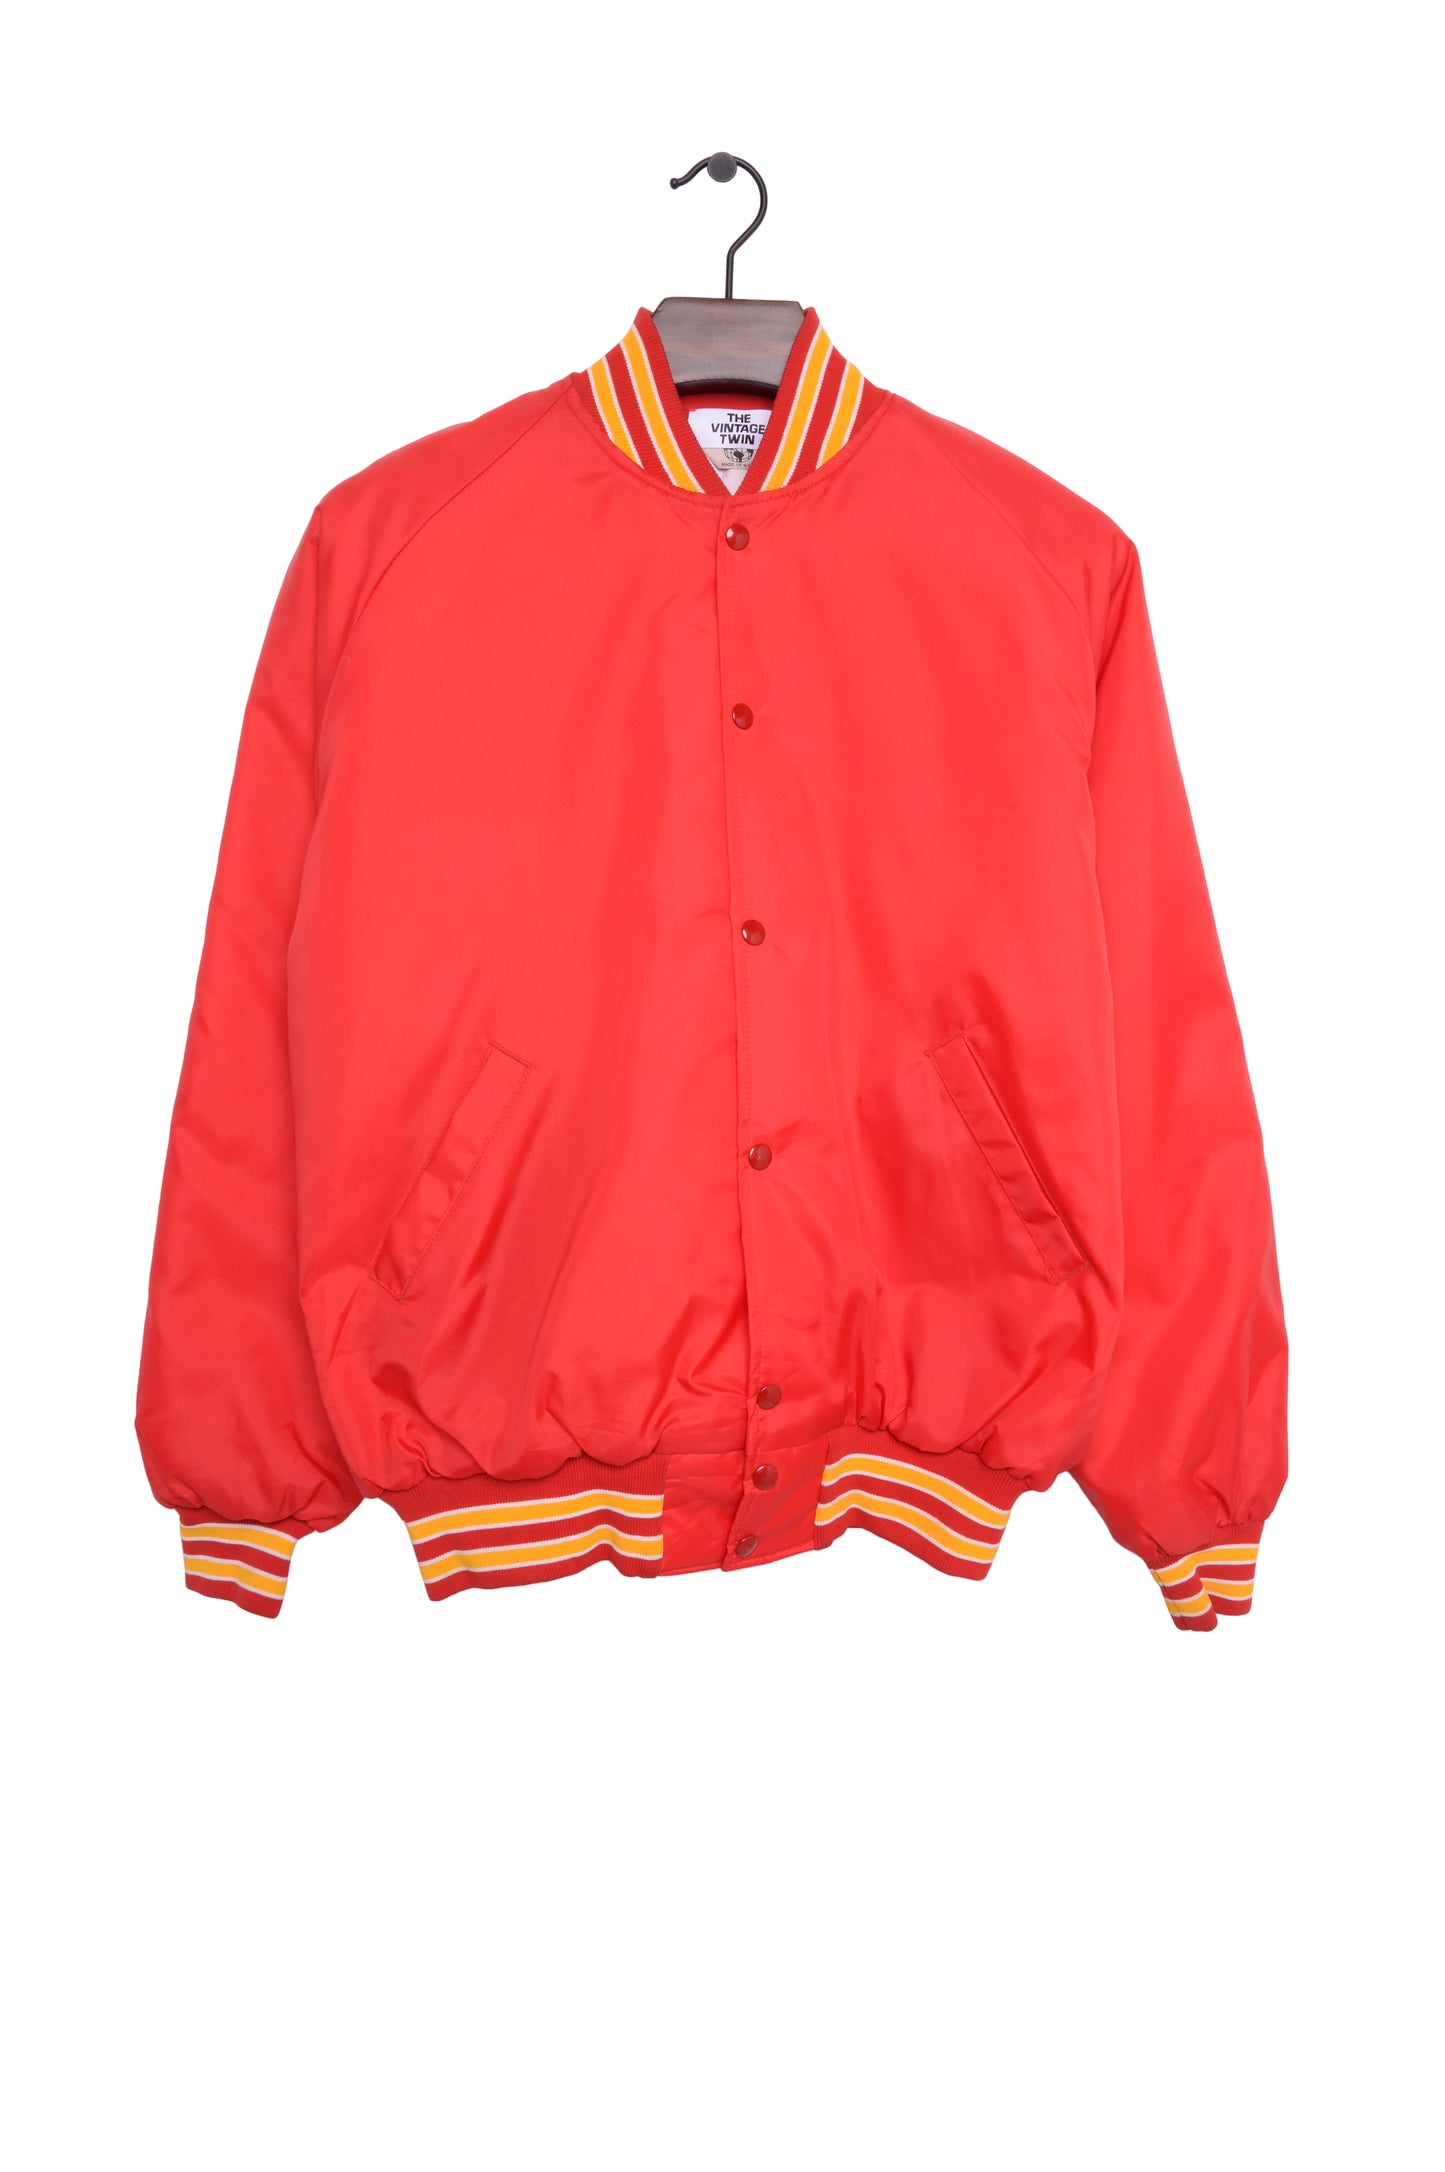 Stanley Steemers Satin Bomber USA